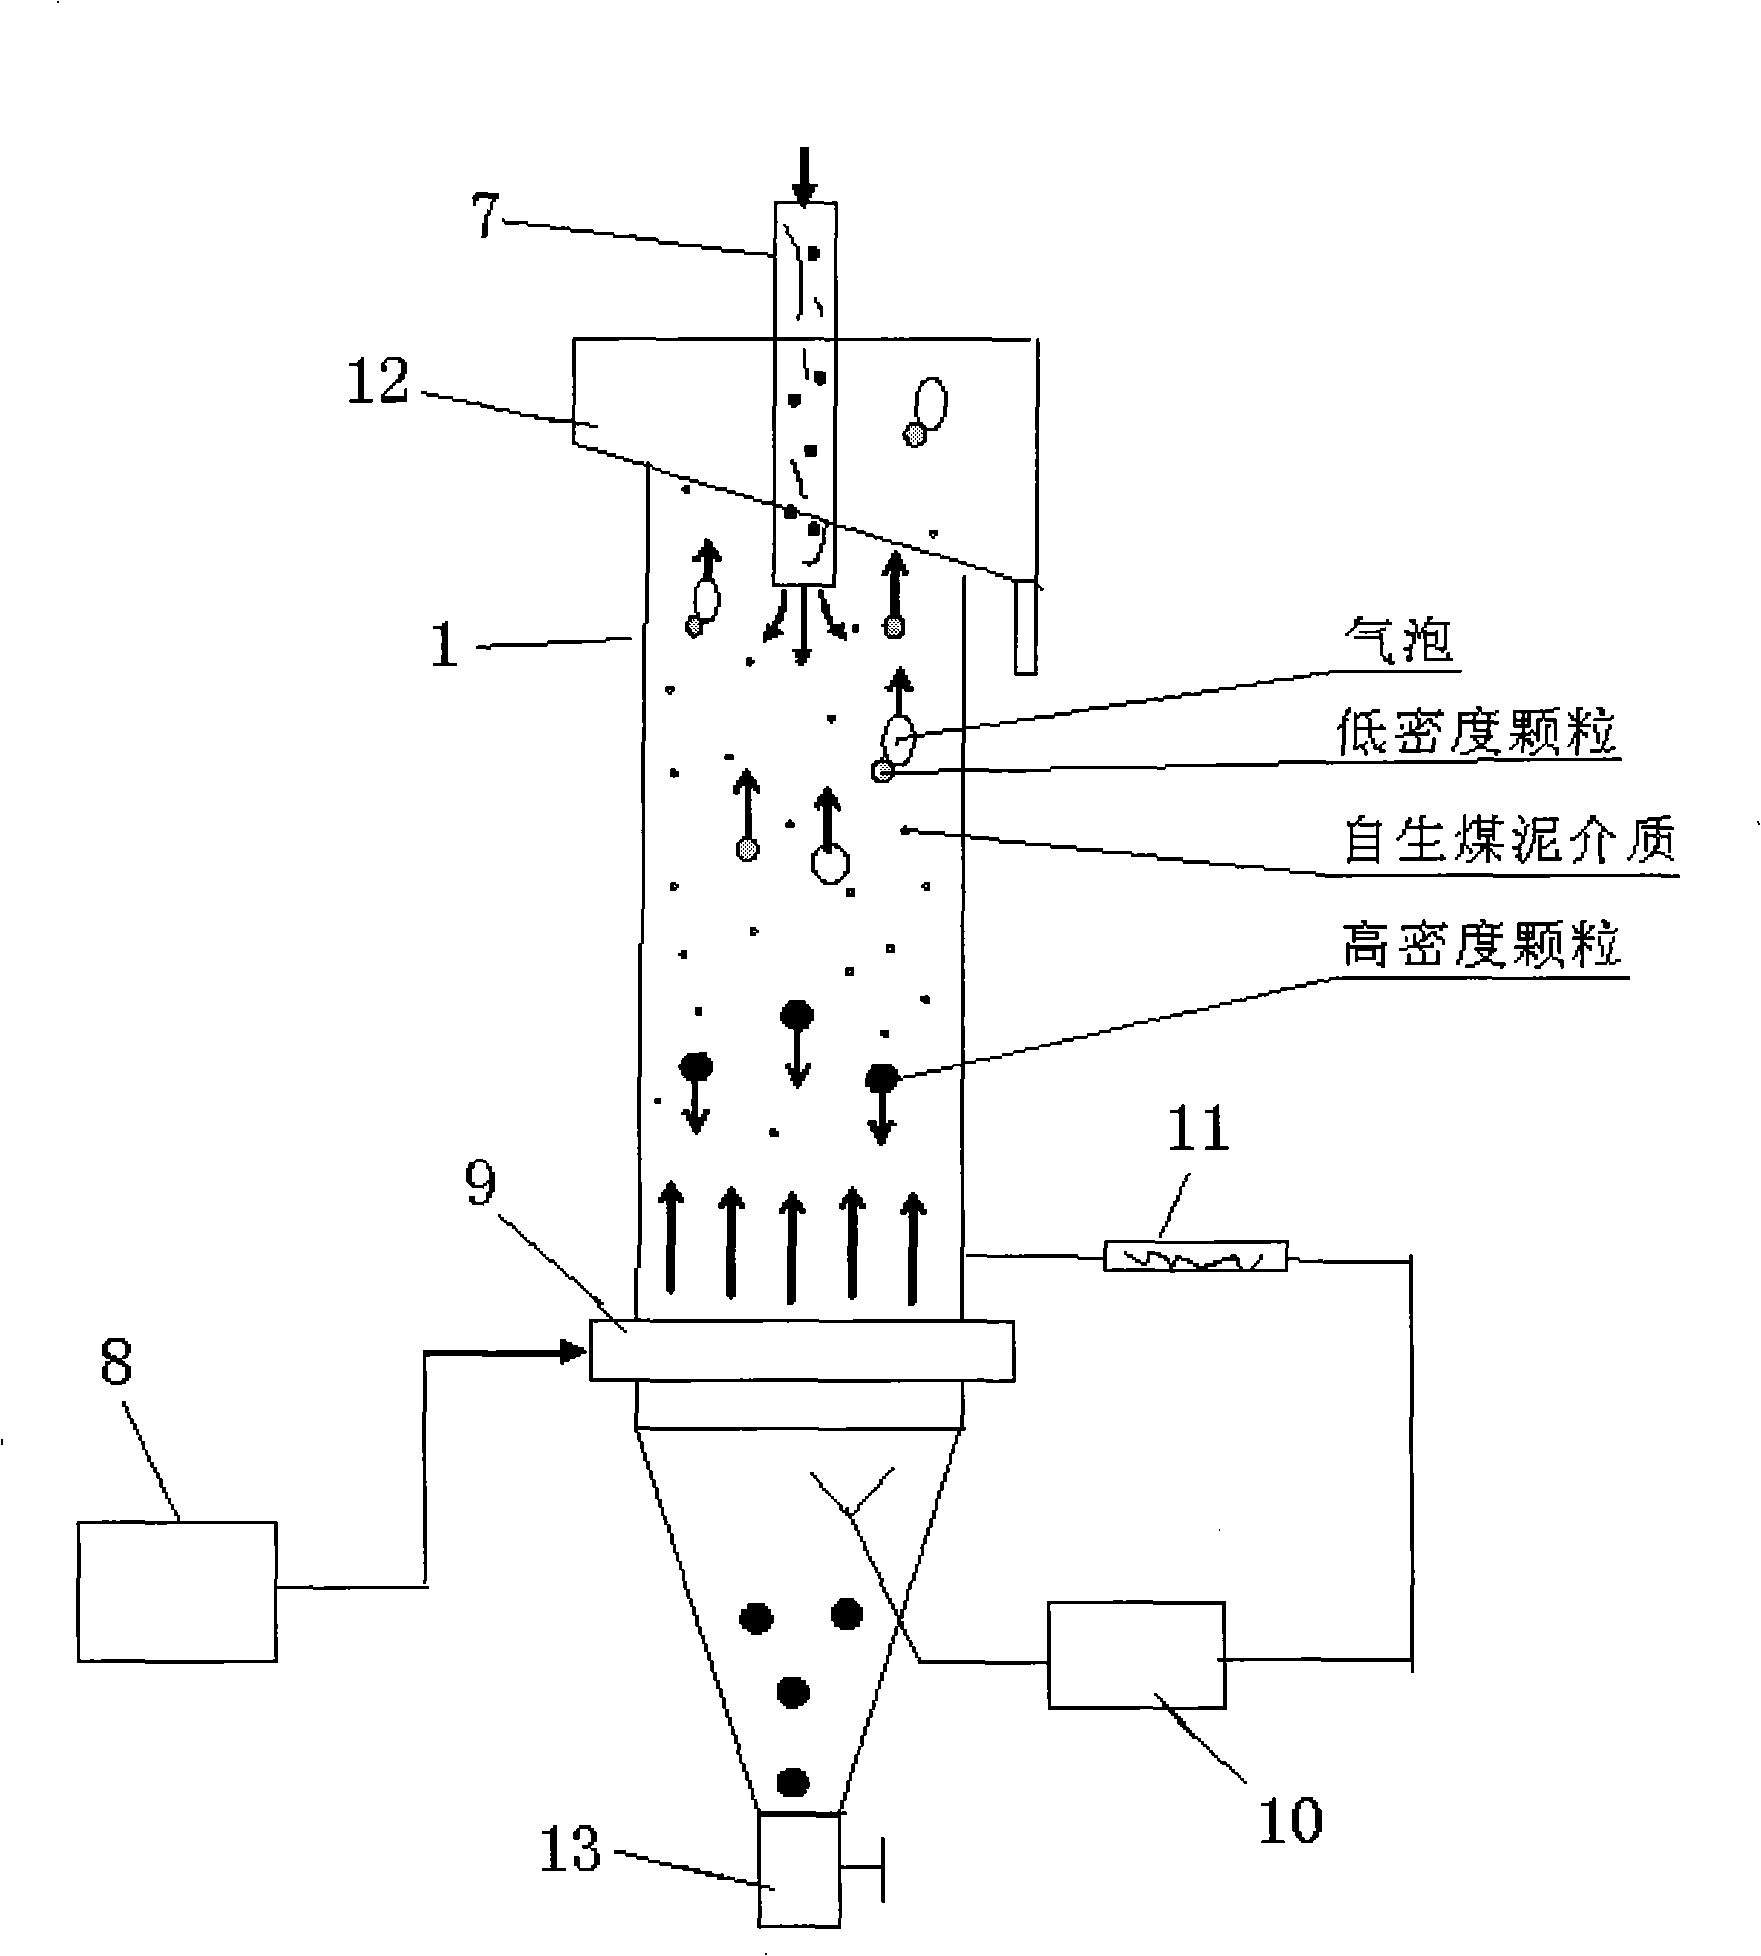 Coarse slime interference bed separation equipment based on gravity force and interfacial force, method and uses thereof